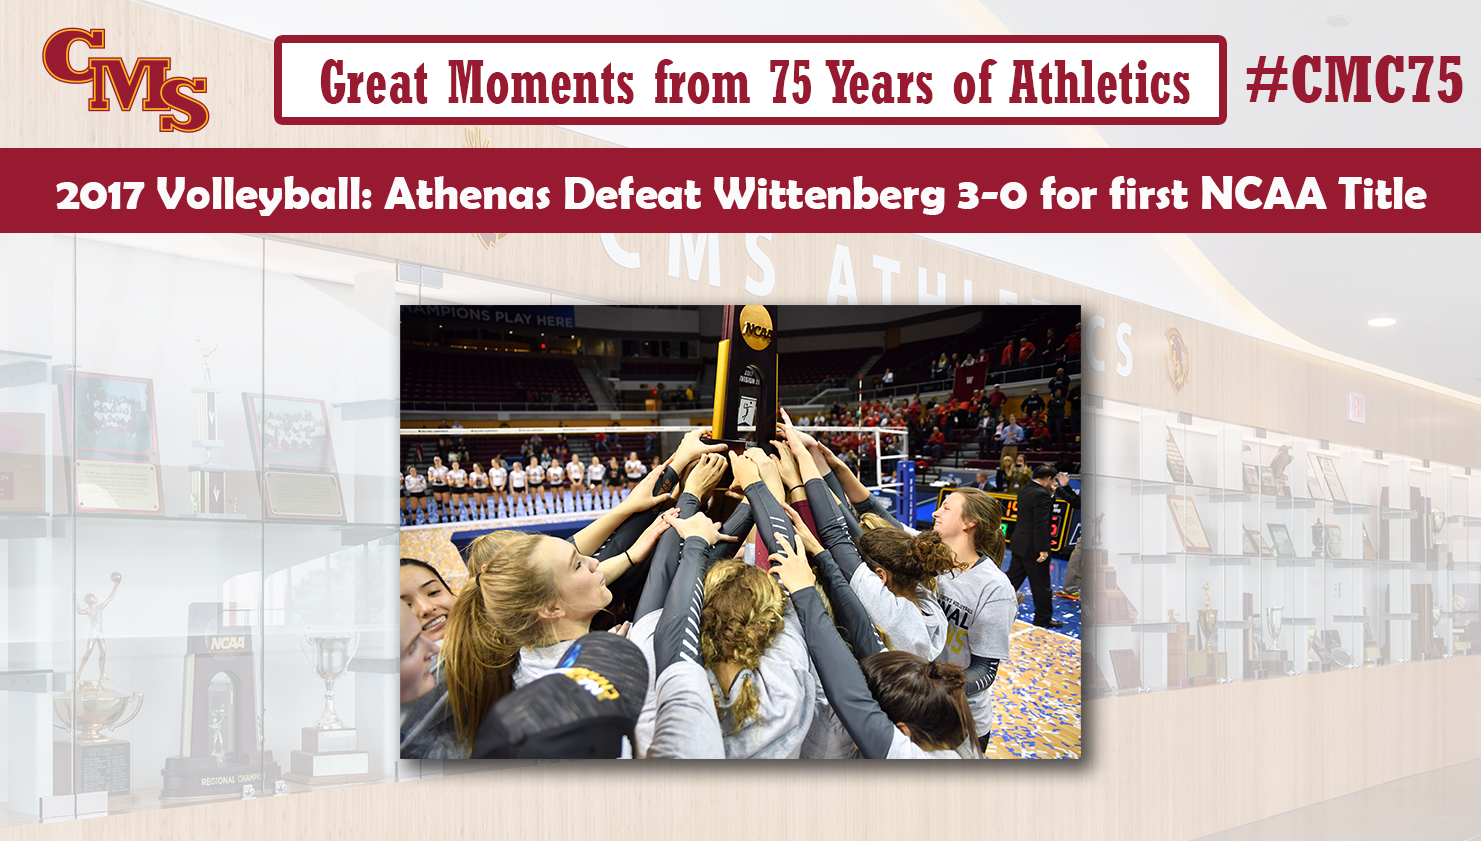 CMS holding up the national championship trophy. Words over the photo read: Great Moments from 75 Years of Athletics, 2017 Volleyball: Athenas Defeat Wittenberg 3-0 for first NCAA title